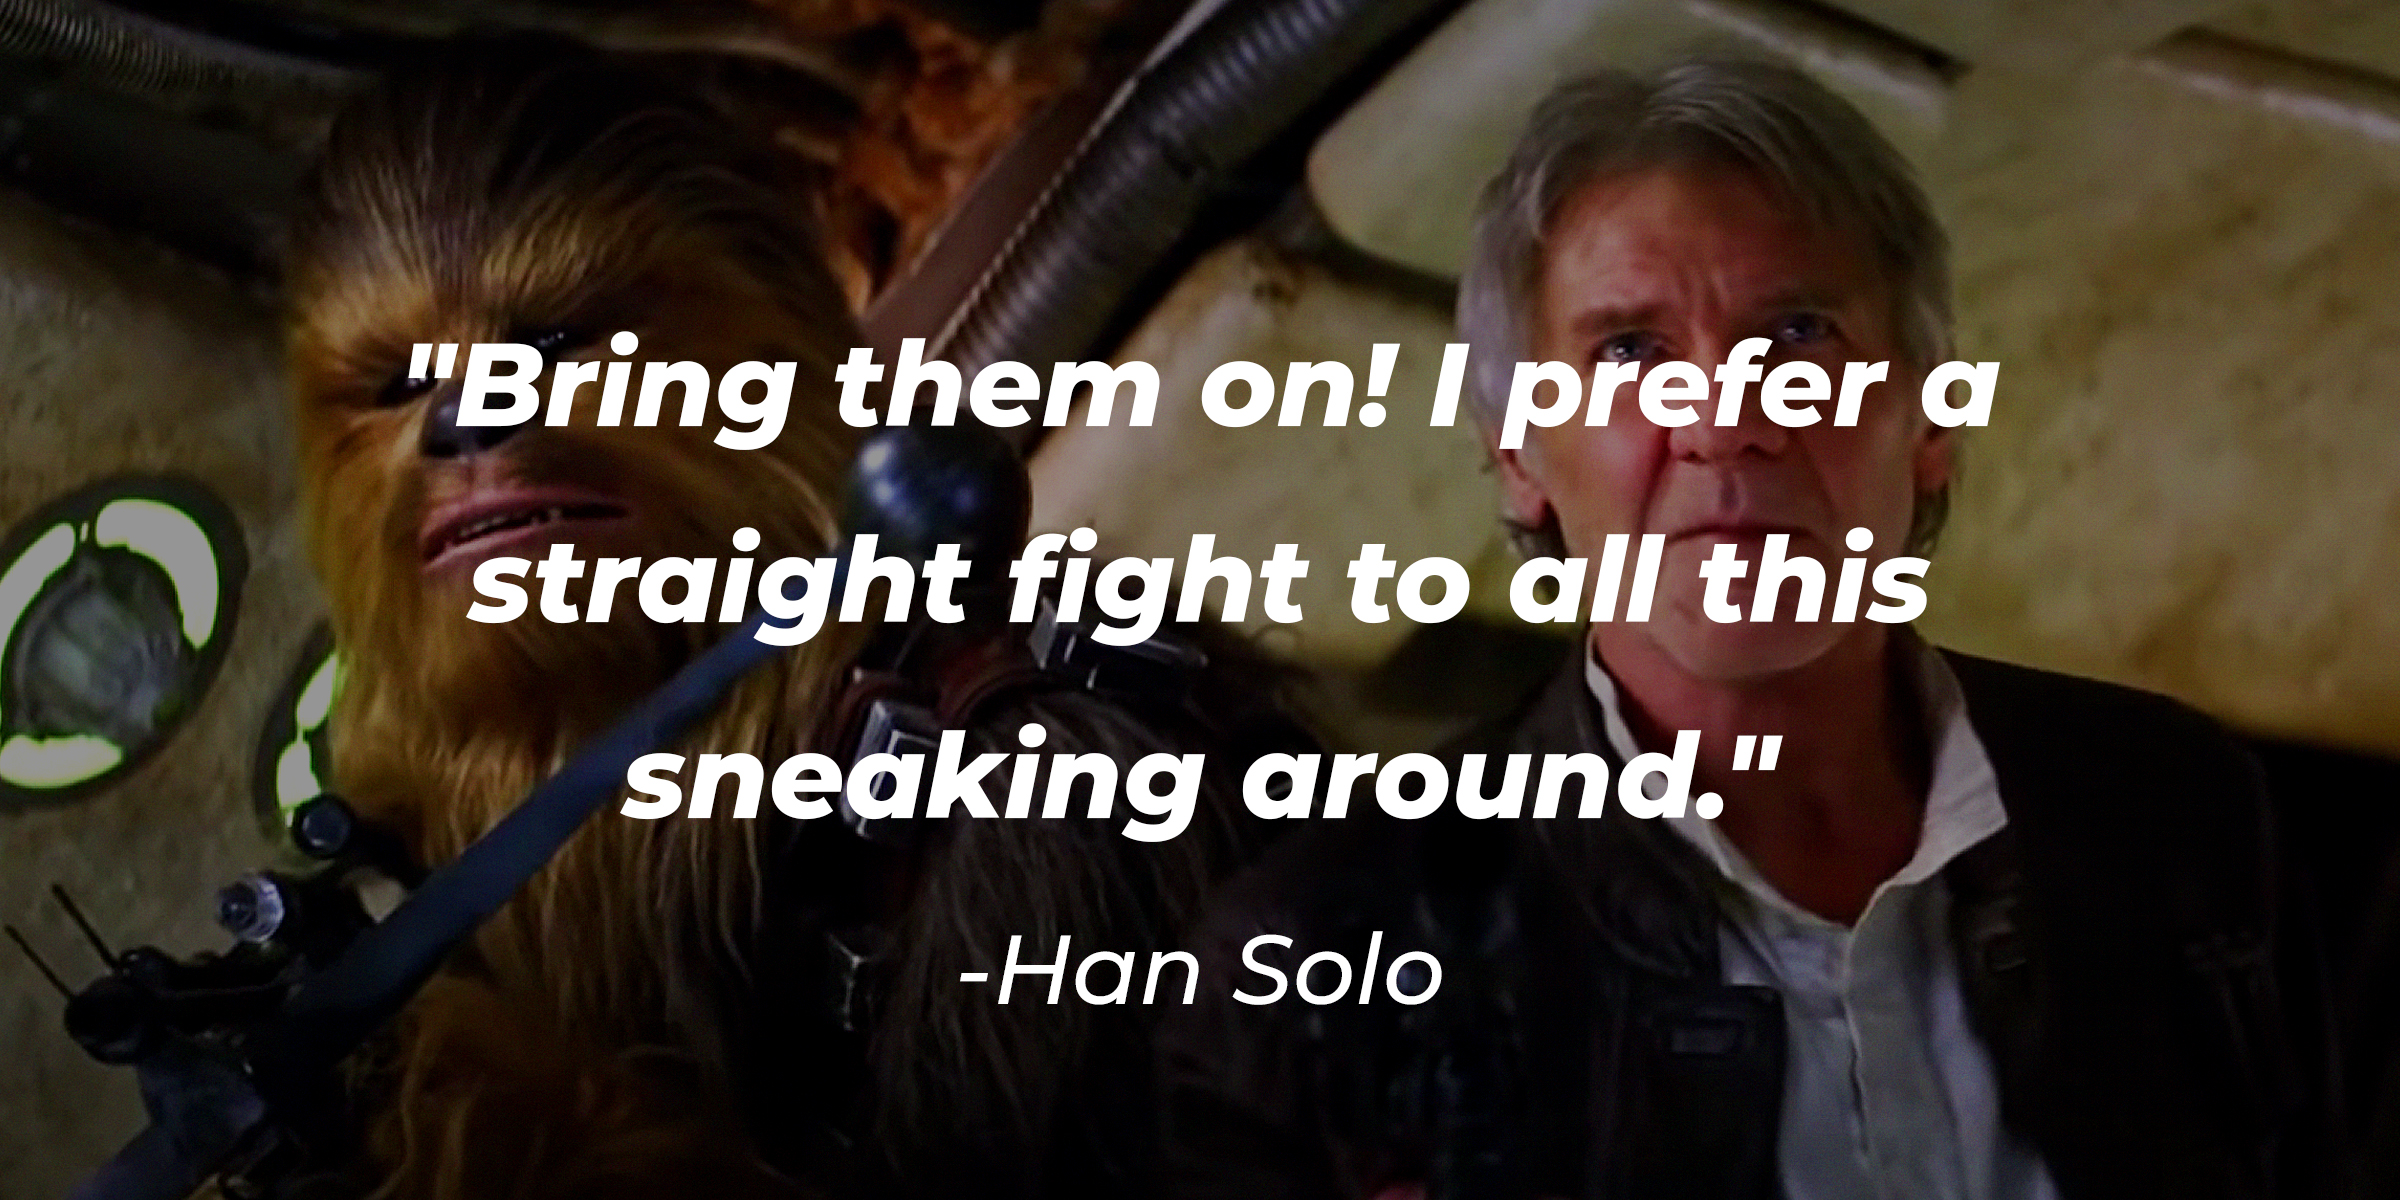 Han Solo’s quote: "Bring them on! I prefer a straight fight to all this sneaking around." | Source: Facebook/StarWars